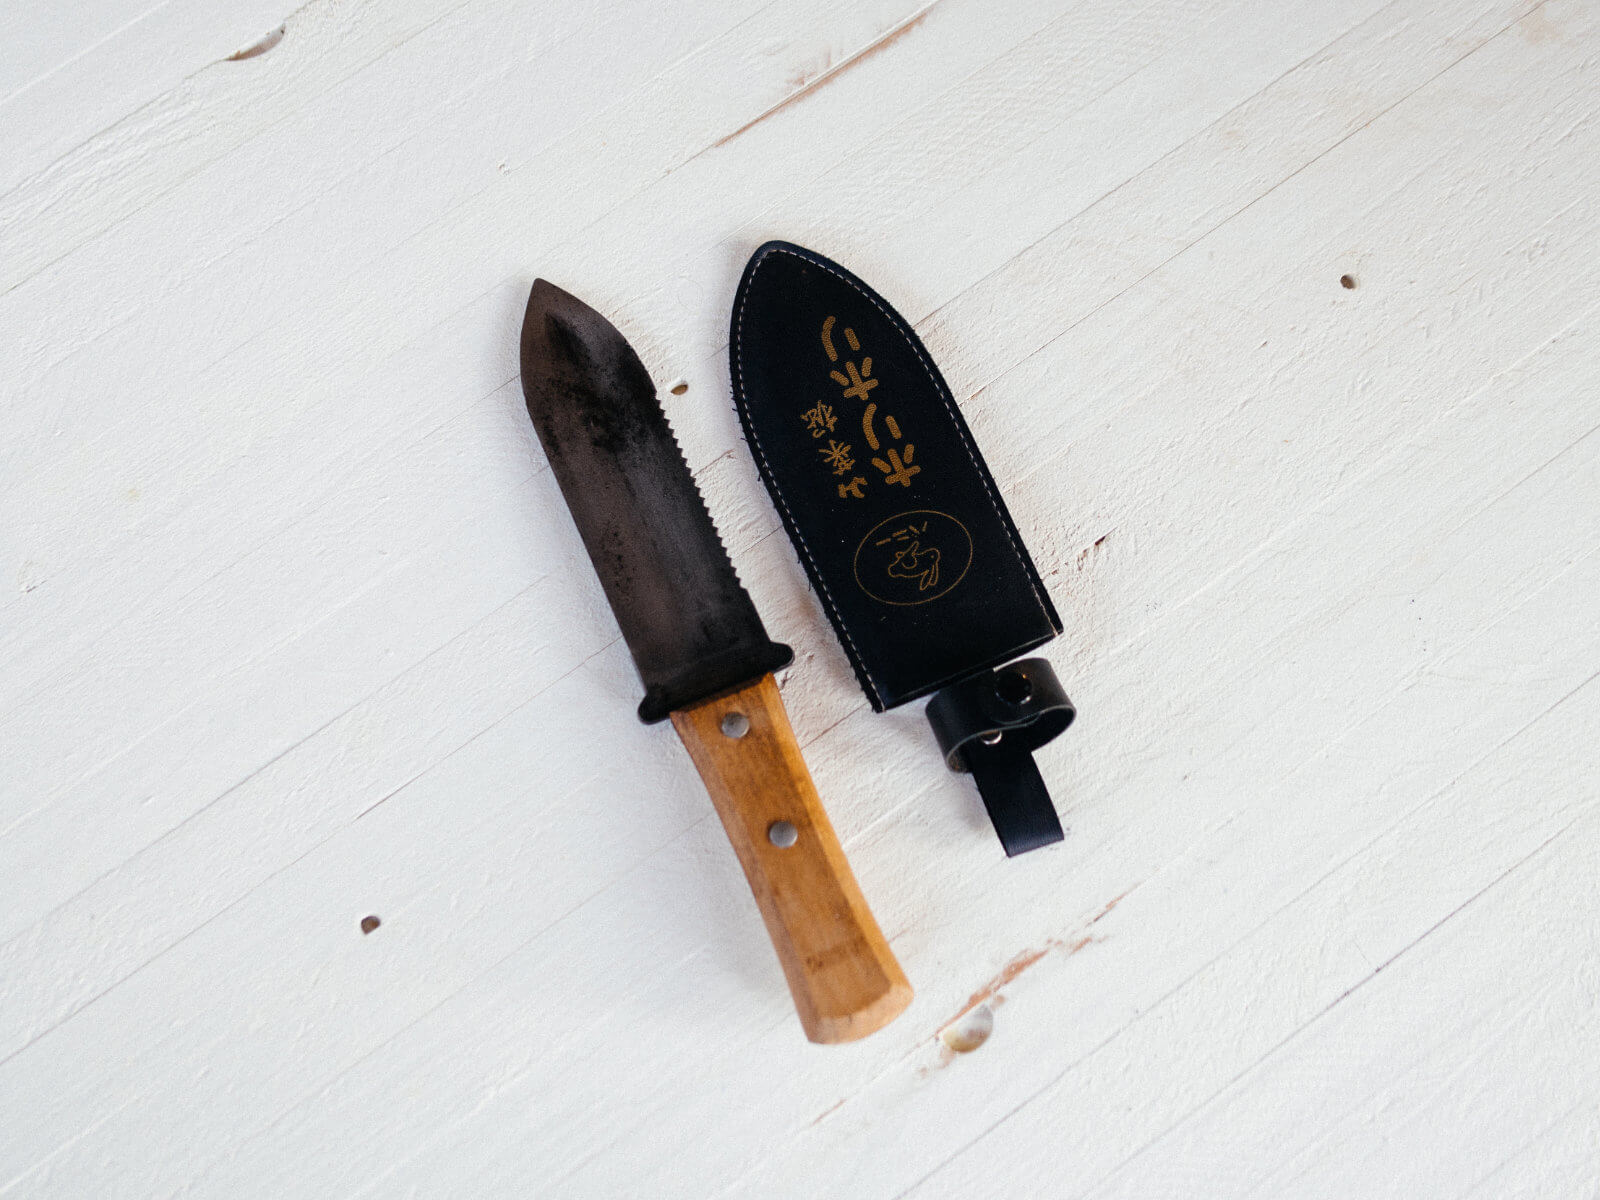 Hori hori knife, also called a soil knife, is a must-have gardening tool